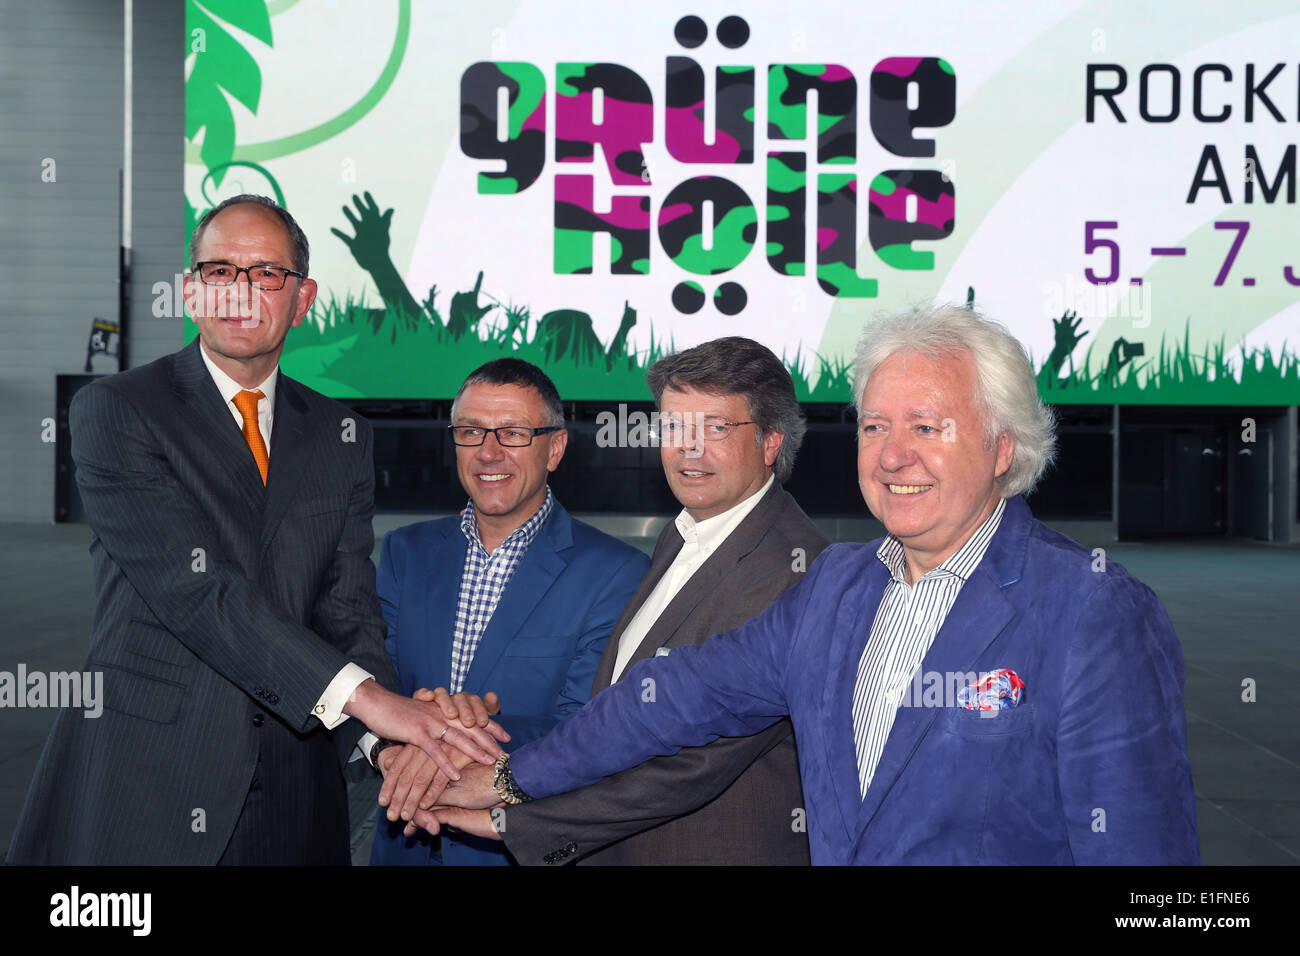 Nuerburg, Germany. 03rd June, 2014. Carsten Schumacher, manager of Nuerburgring Capricorn GmbH (L-R), Stuart Galbraith (CEO Kilimanjaro Live), Peter Schwenko (CEO Deutsche Entertainment AG) and Ossy Hoppe (Wizard Promotions) pose in front of the new logo "Gruene Hoelle" (lit. green hell) after a press conference for the upcoming rock festival Rock am Ring at the Nuerburgring in Nuerburg, Germany, 03 June 2014. Photo: THOMAS FREY/dpa/Alamy Live News Stock Photo